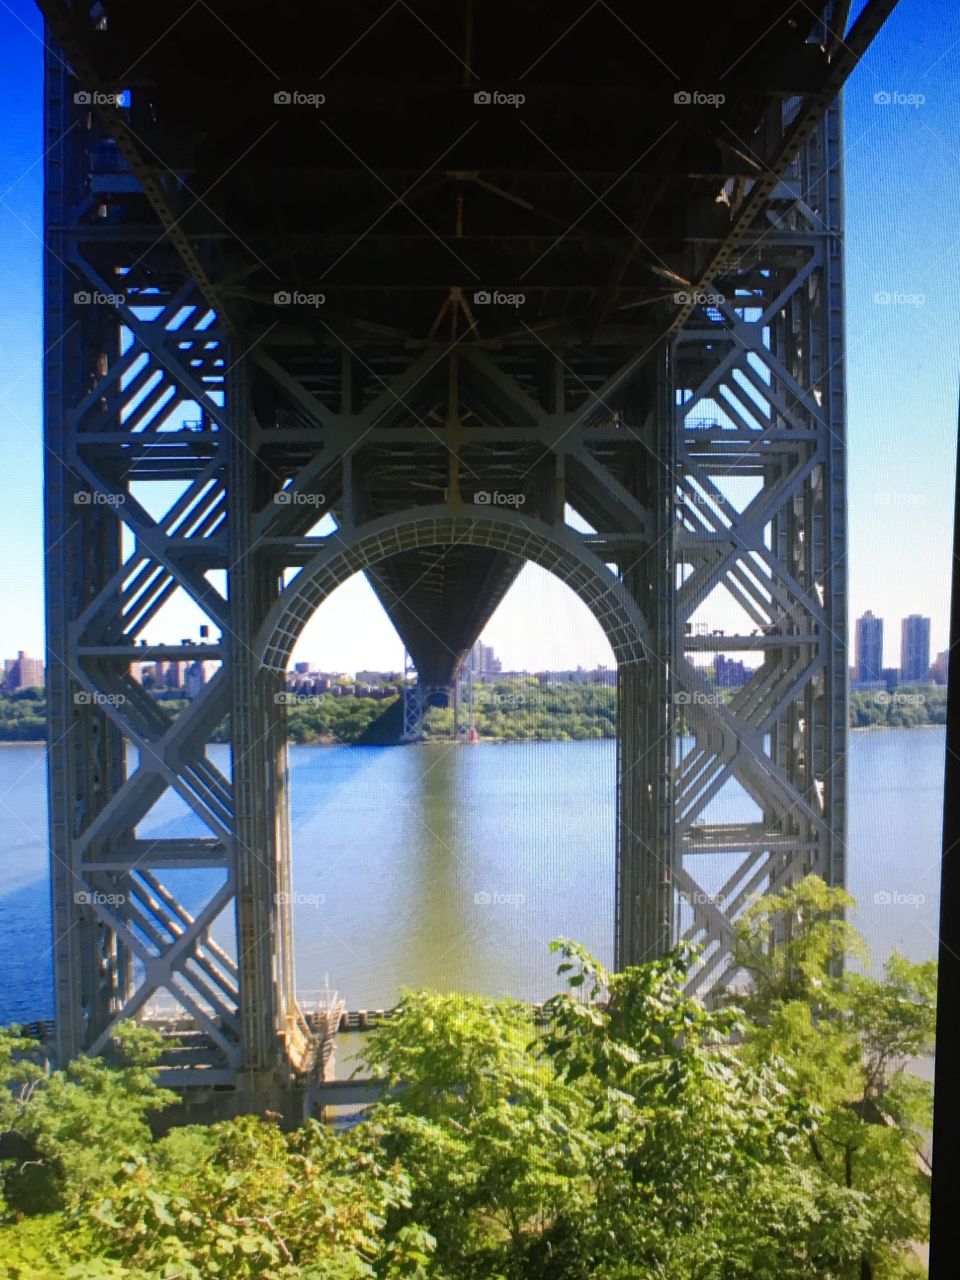 The view from the road under the George Washington Bridge.